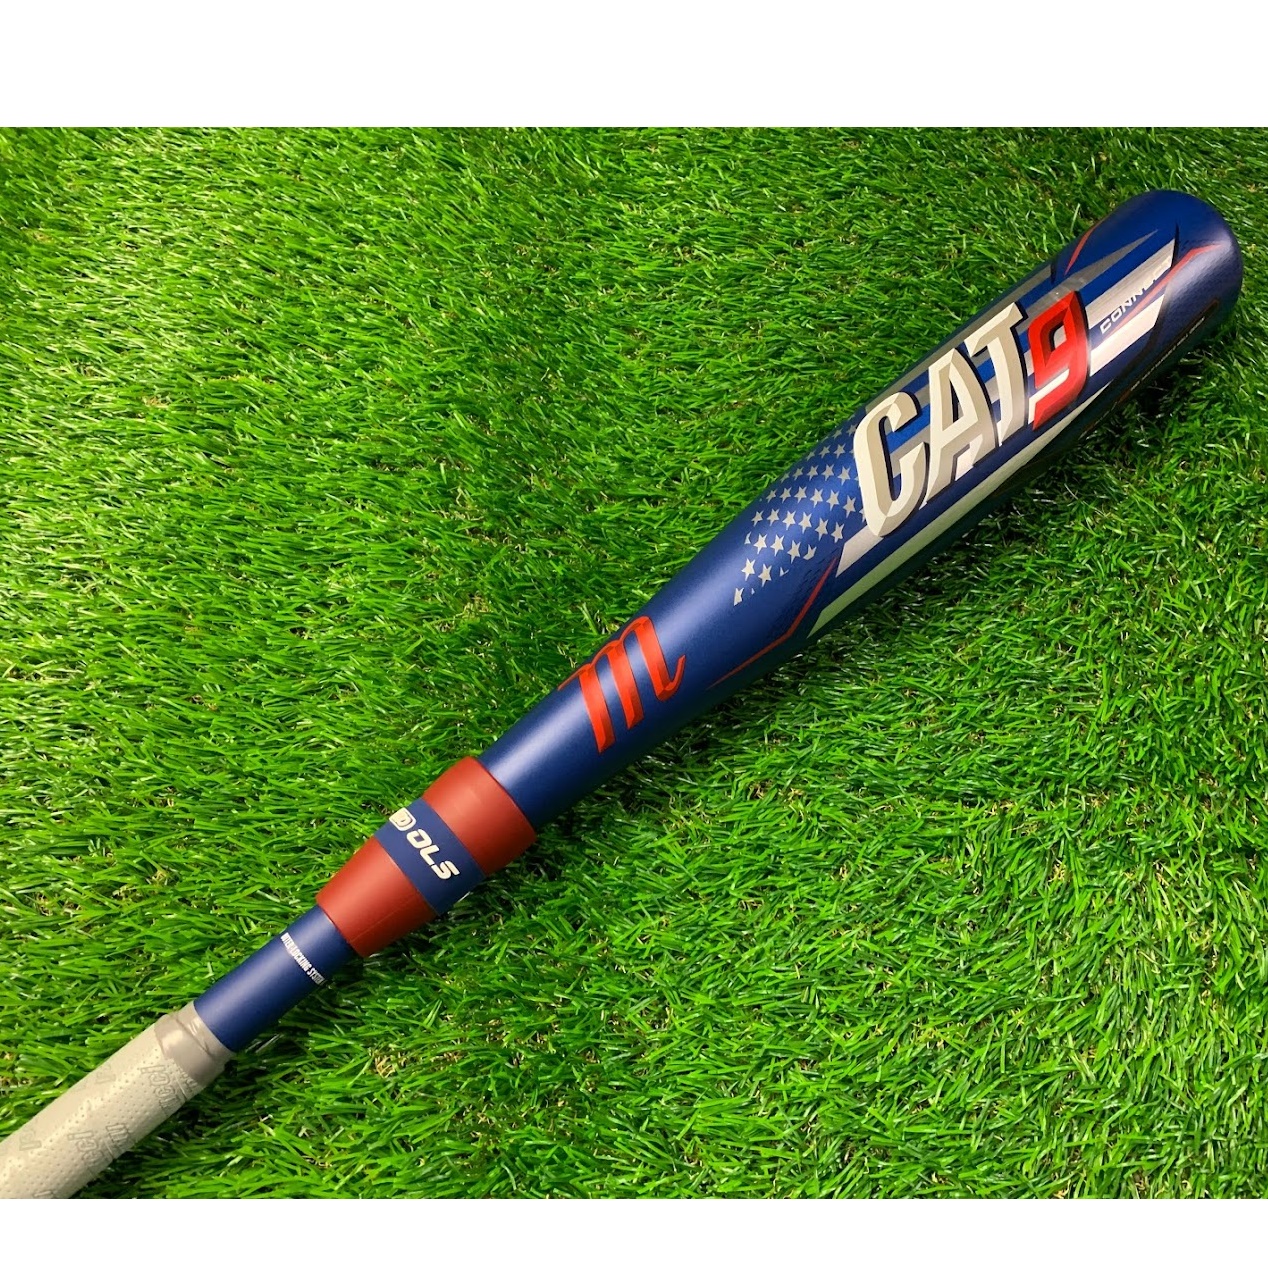 marucci-cat-9-connect-8-pastime-baseball-bat-30-inch-22-oz-demo MSBCC98-3022-DEMO Marucci  Demo bats are a great opportunity to pick up a high